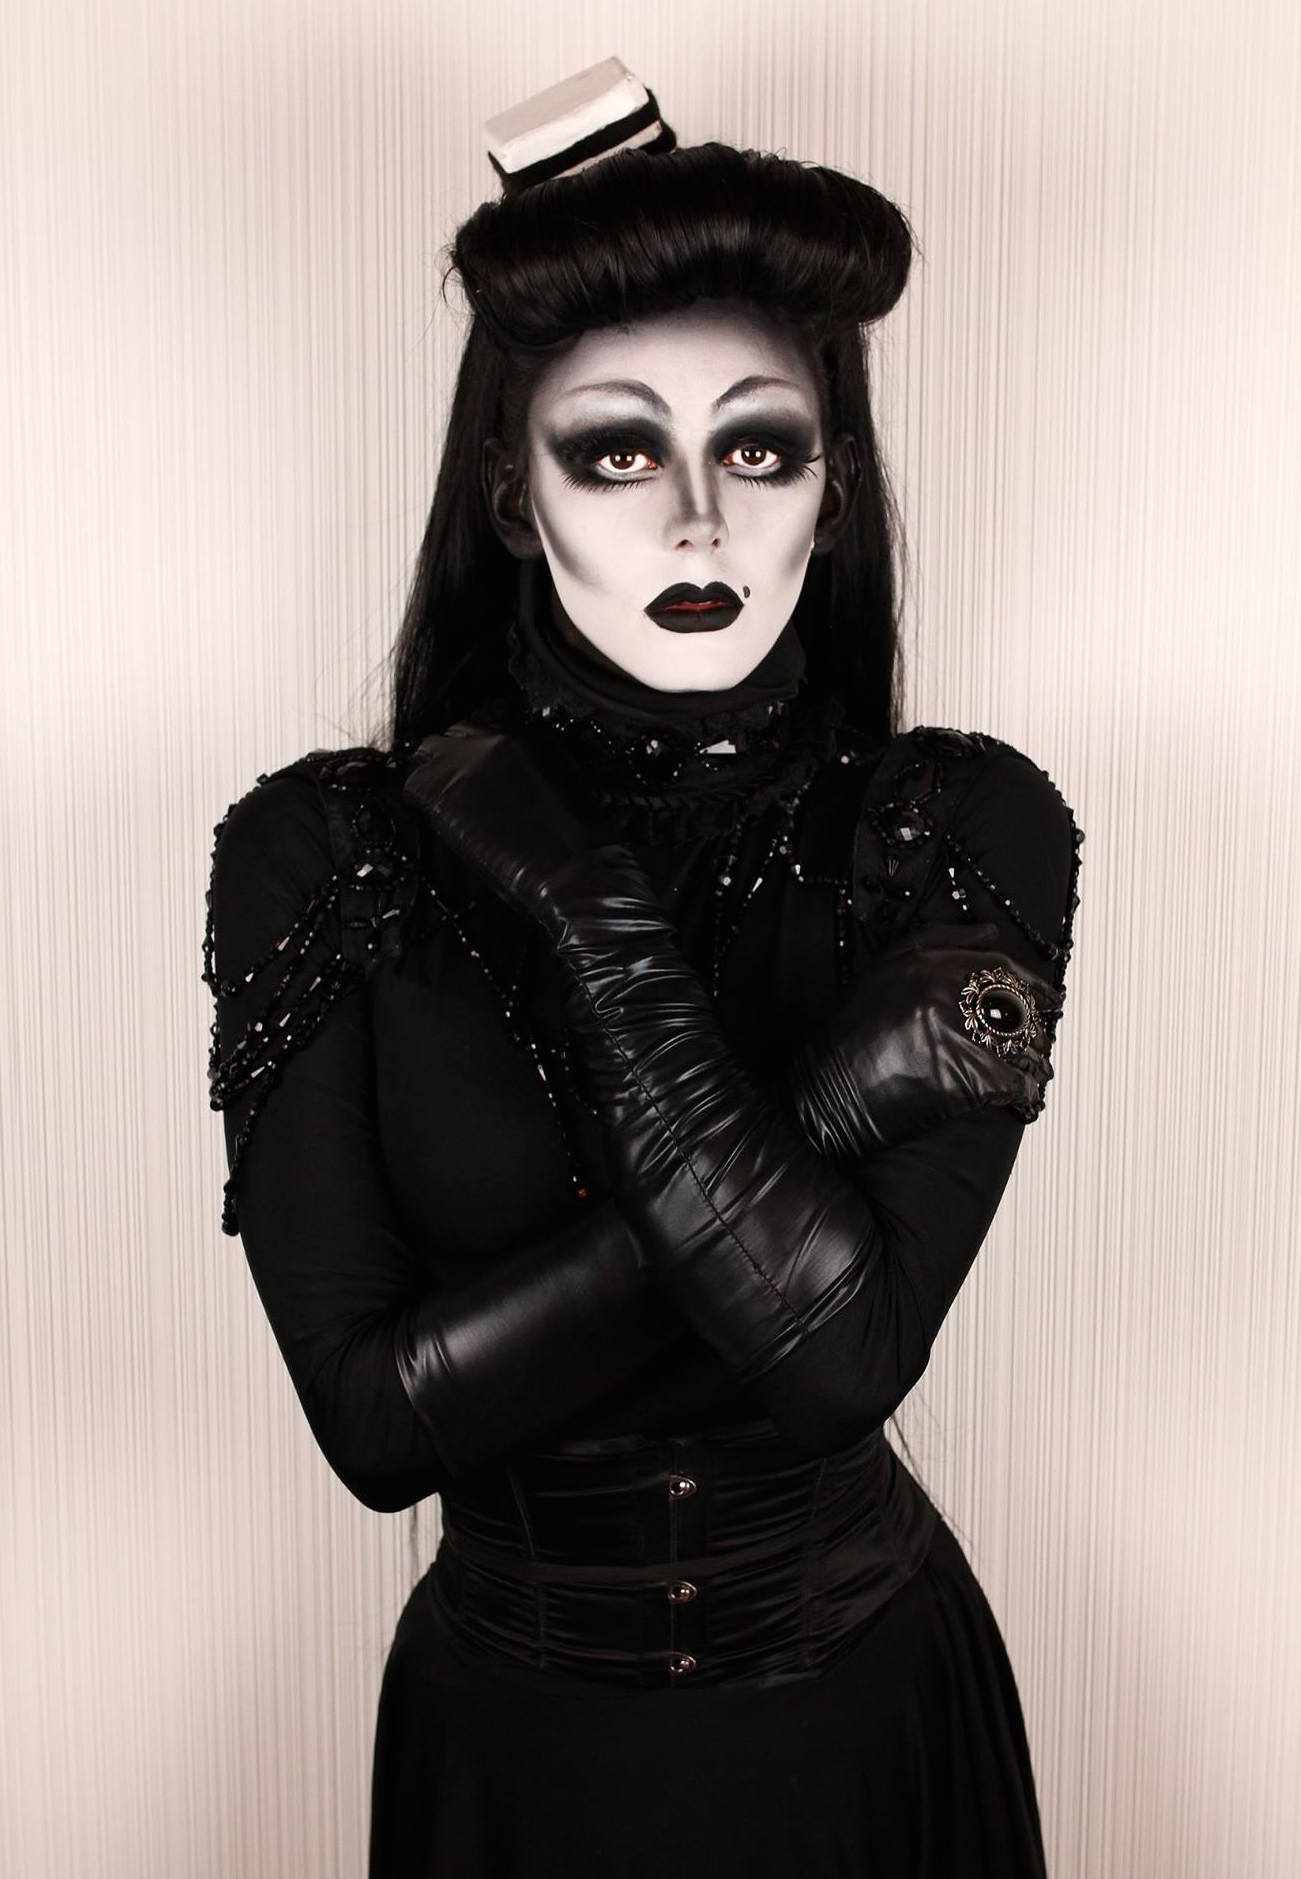 Liquorice Black Drag - Famous Drag Queens And The Ugly Side Of Drag Culture